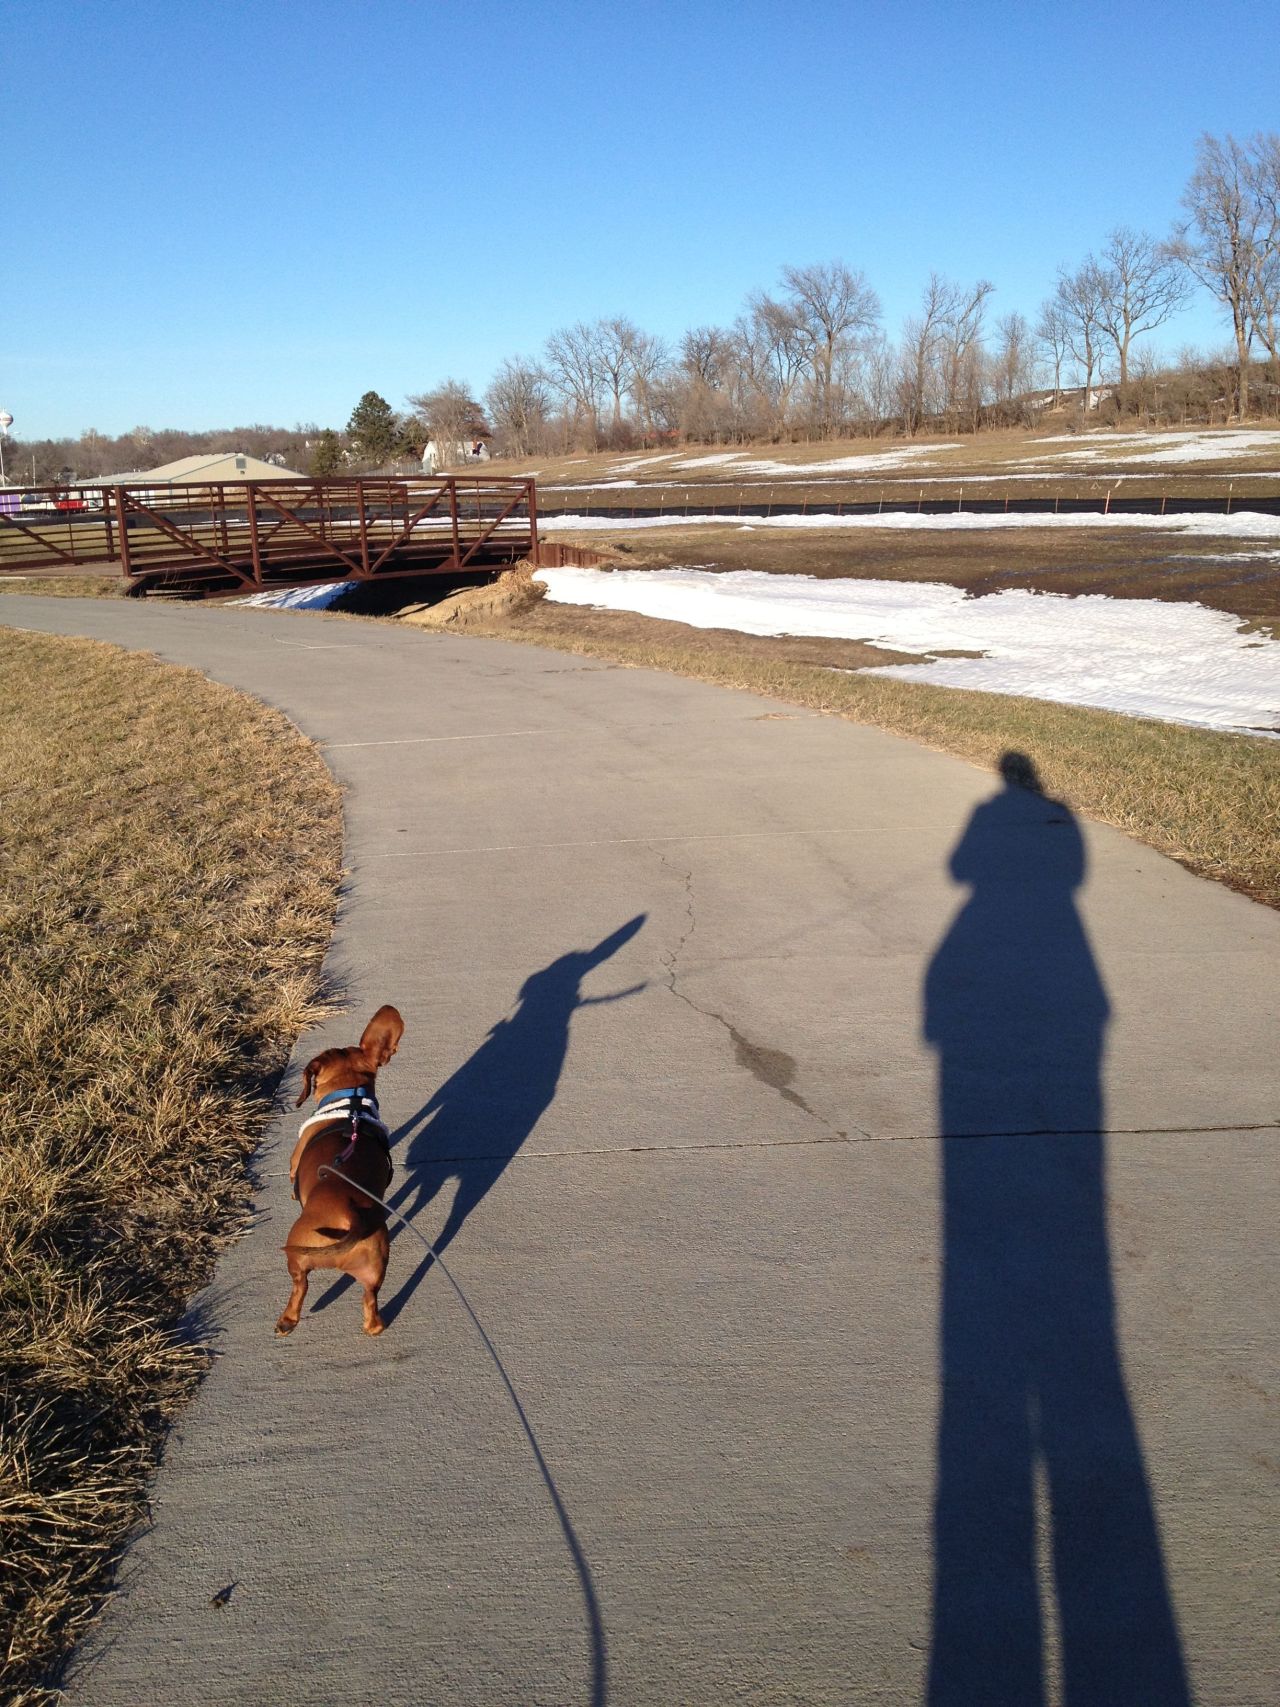 <a href="http://ireport.cnn.com/docs/DOC-919582" target="_blank">iReporter Holly Naab</a> shot this photo of her and her puppy, Frank, at a park in Elkhorn, Nebraska. "I'm hoping for an early spring, so Frank can get outside more," she said.<br />